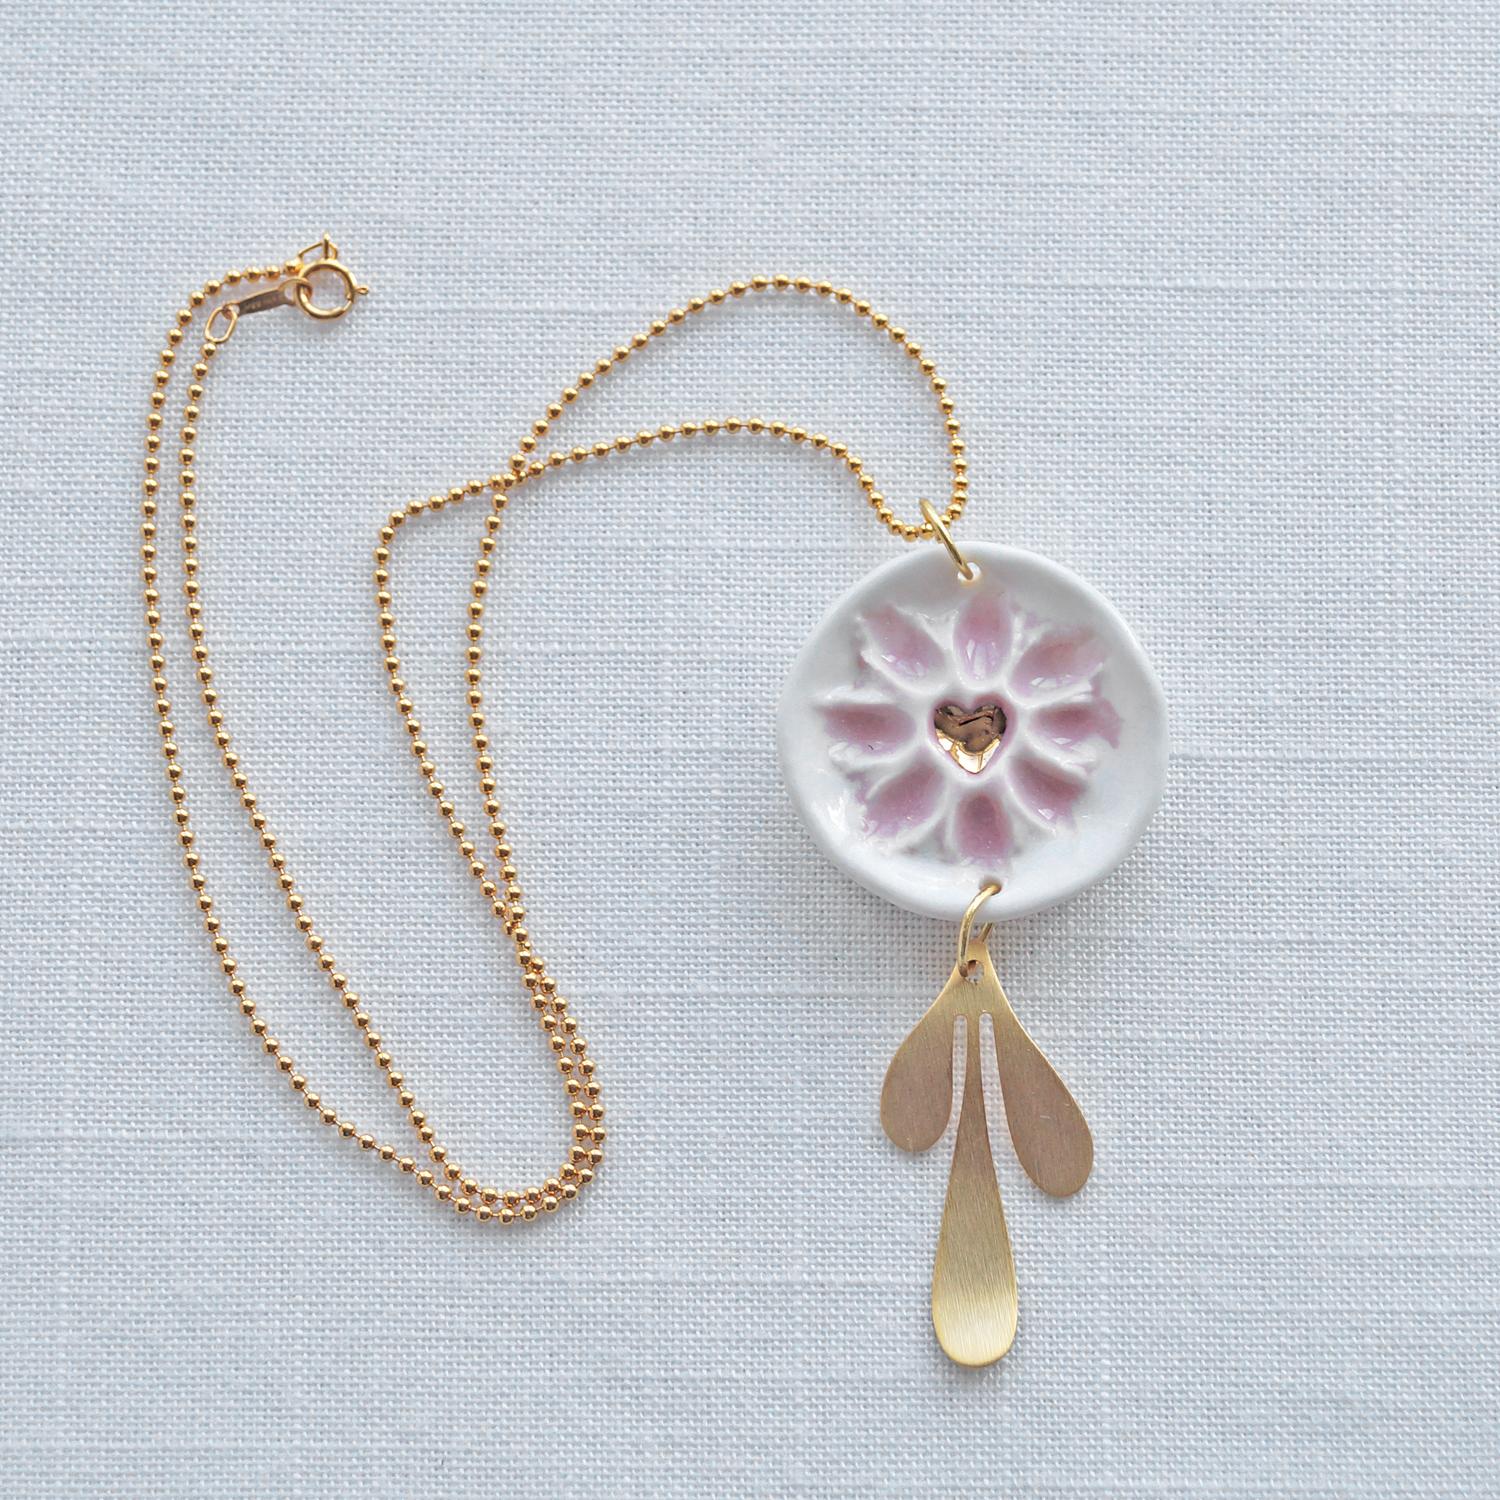 HEART blossom necklace, heart necklace, white porcelain, gold fill bead chain, Vanillakiln, 18th anniversary gift